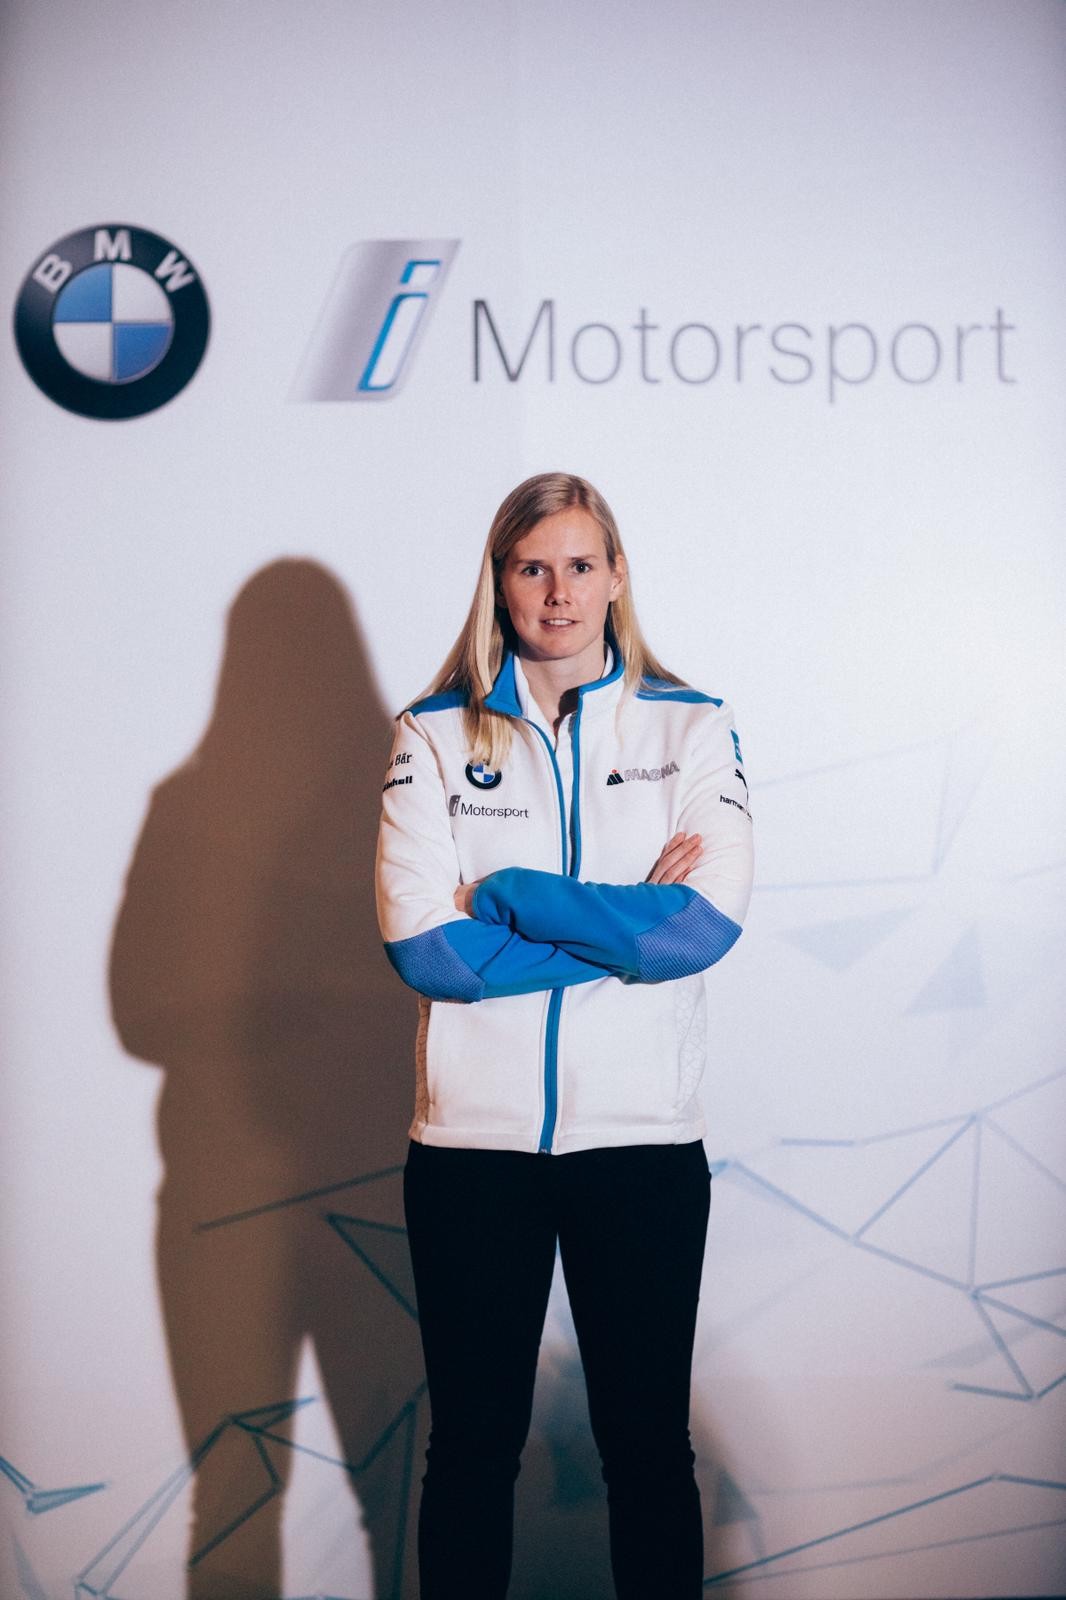 Beitske Visser is the first woman to have made it onto the BMW Motorsport Junior Programme. Photo: BMW